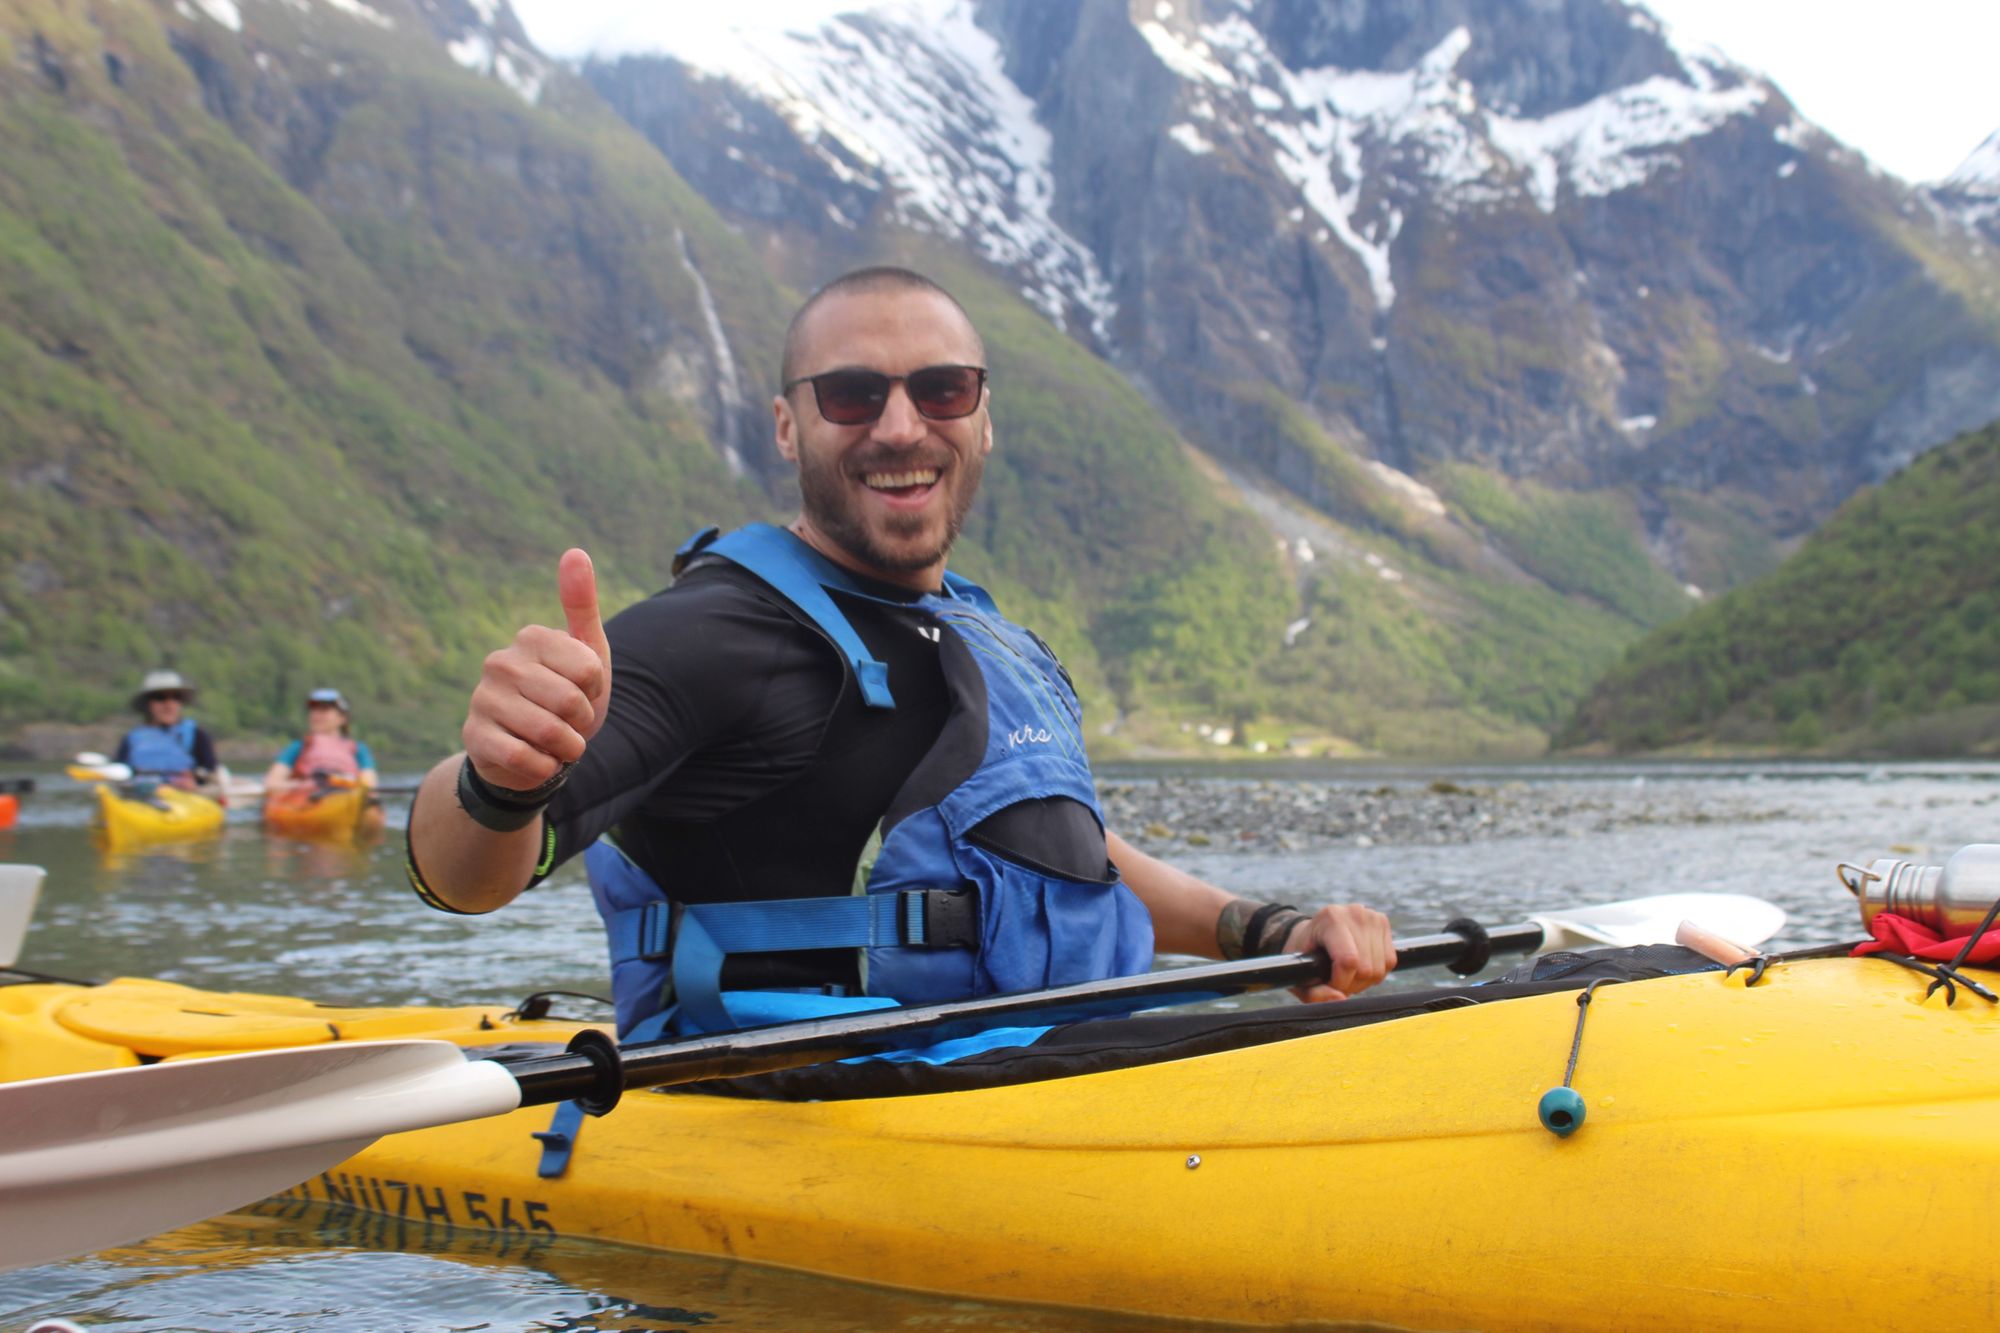 A man poses with his thumb up on a kayak in the Norwegian fjords.